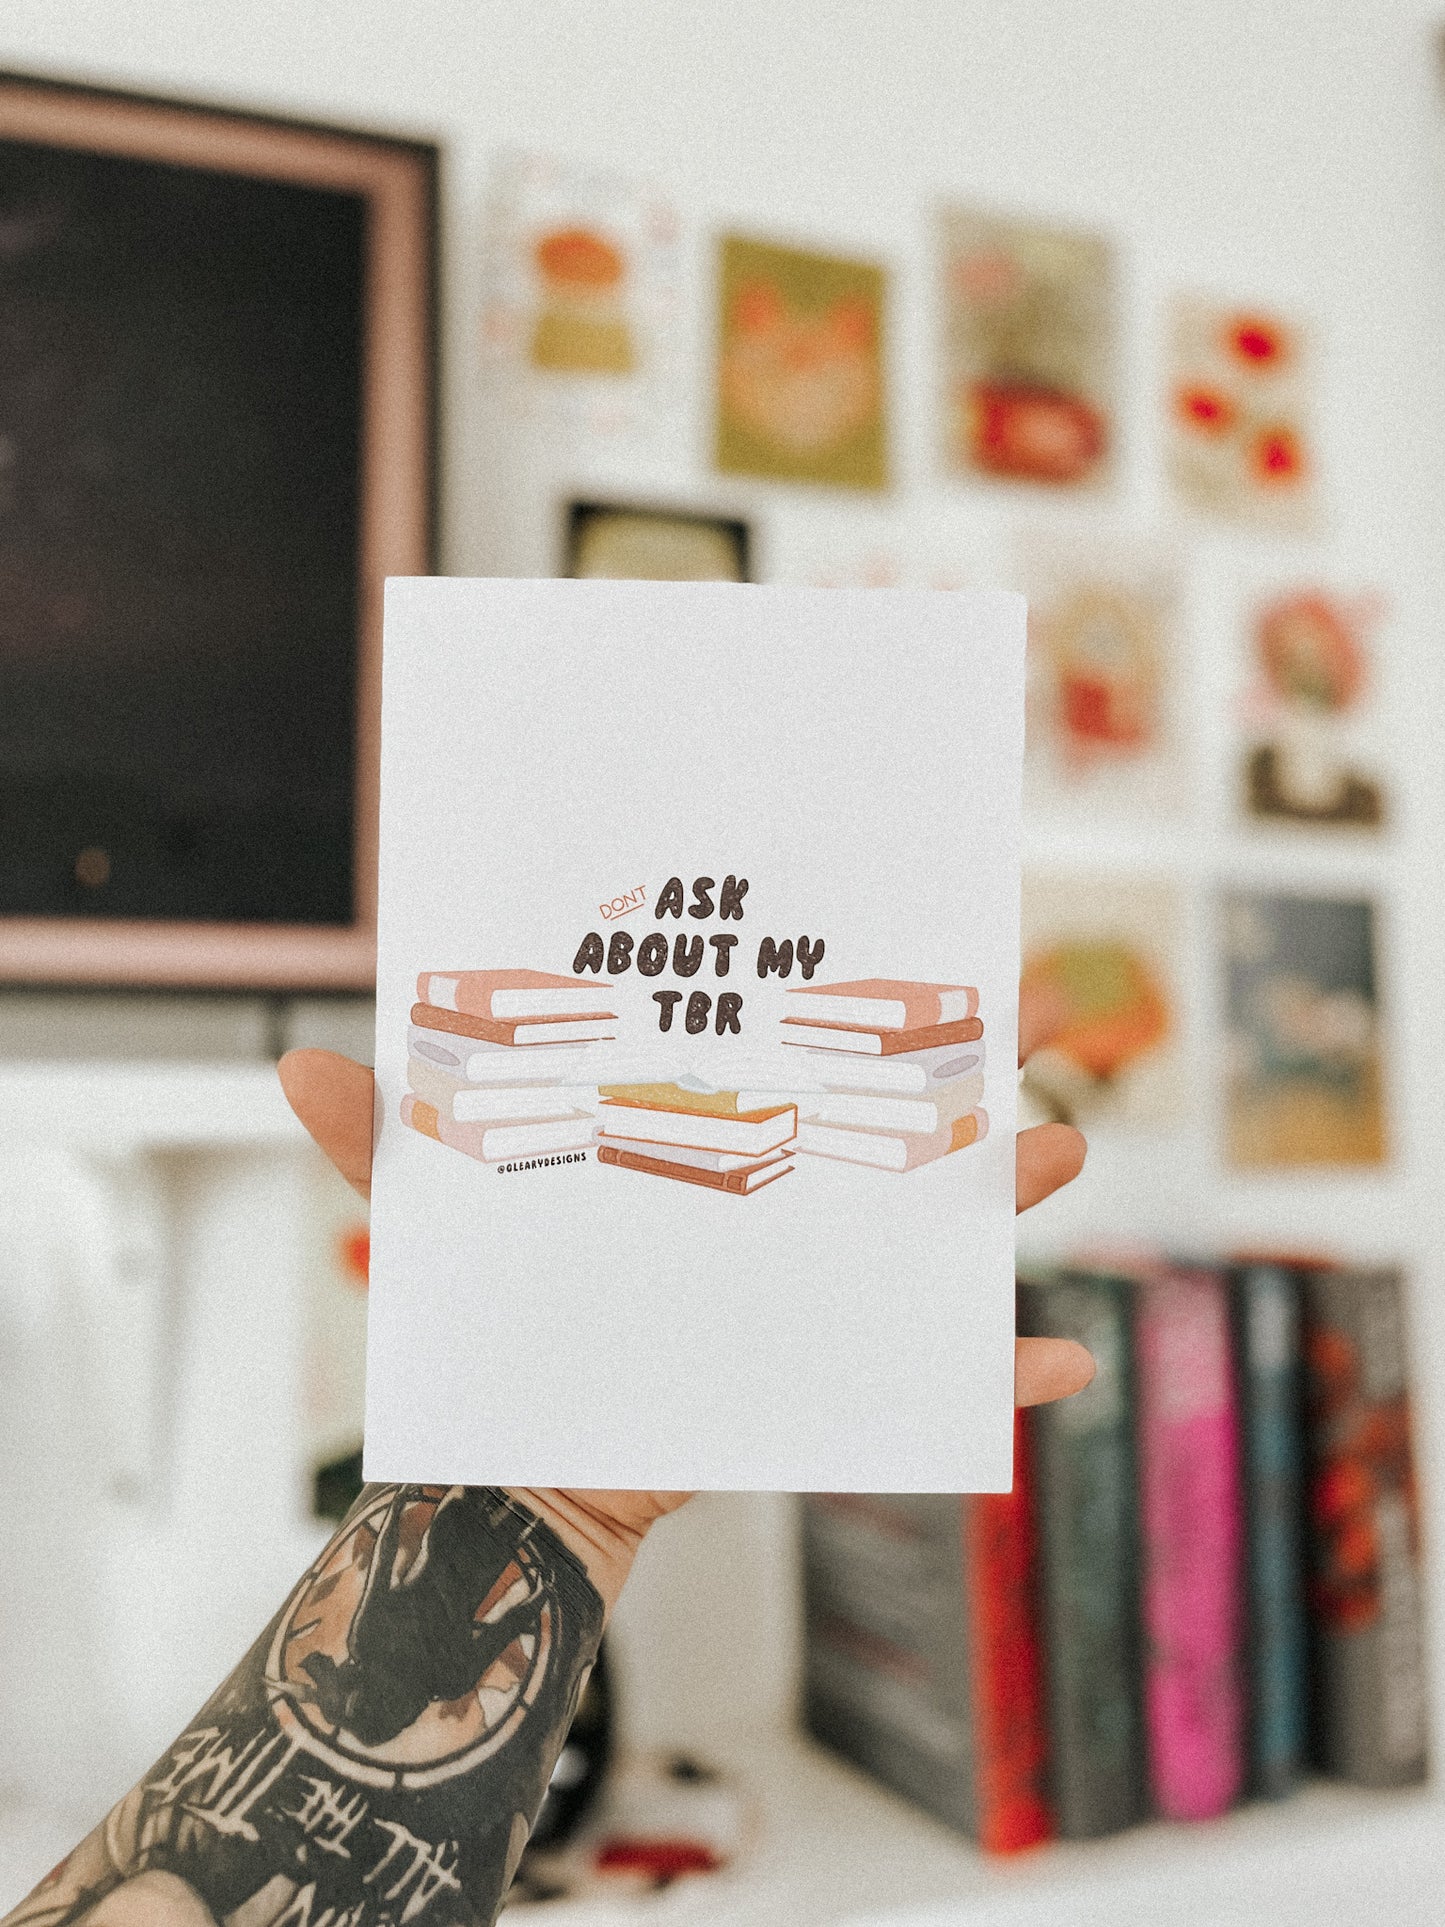 Don't Ask About My TBR 5x7 Print